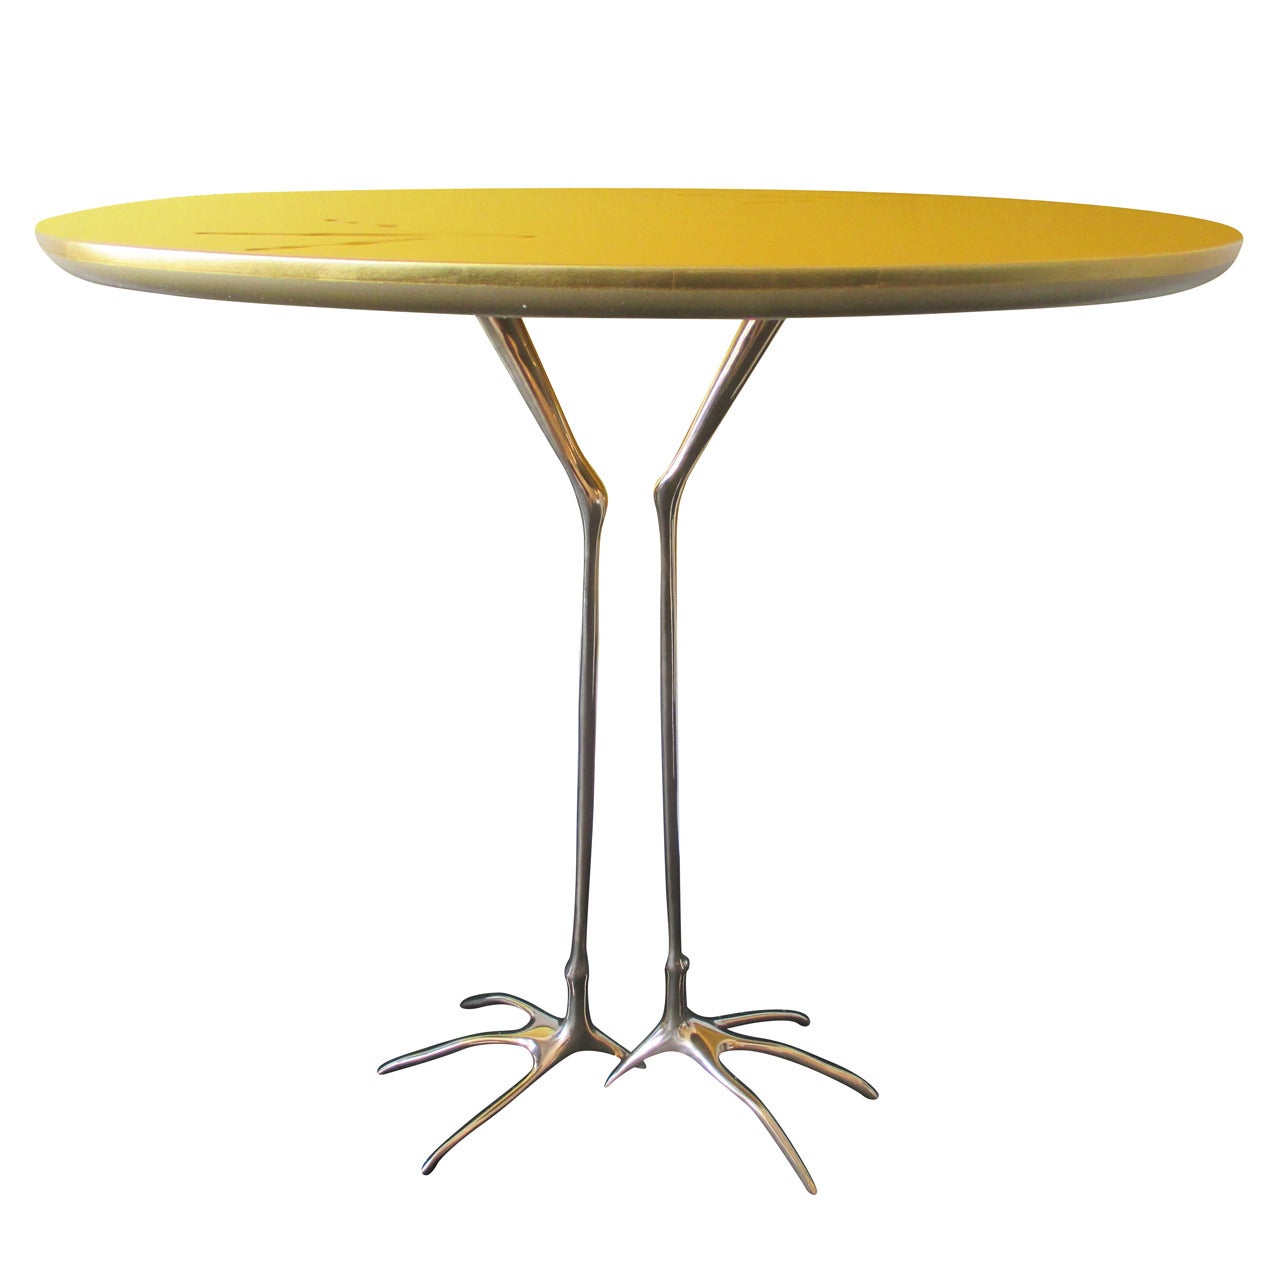 SMALL TABLE GOLD LEAFED W/BRASS LEGS  by Meret Oppenheim